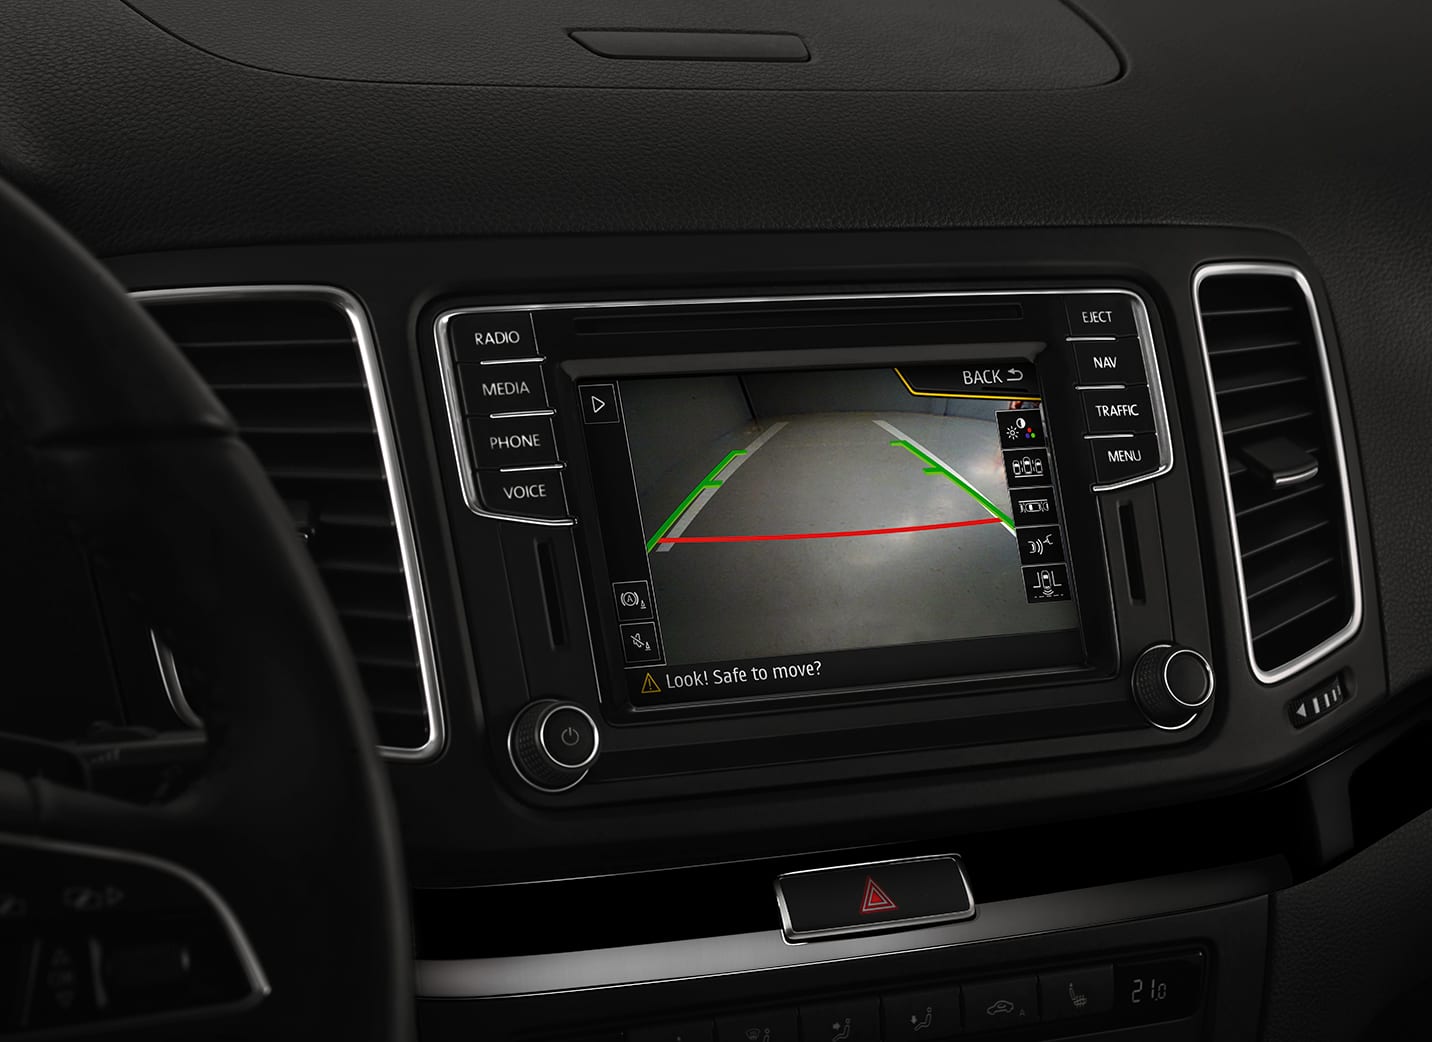 SEAT Alhambra technology with rear view camera